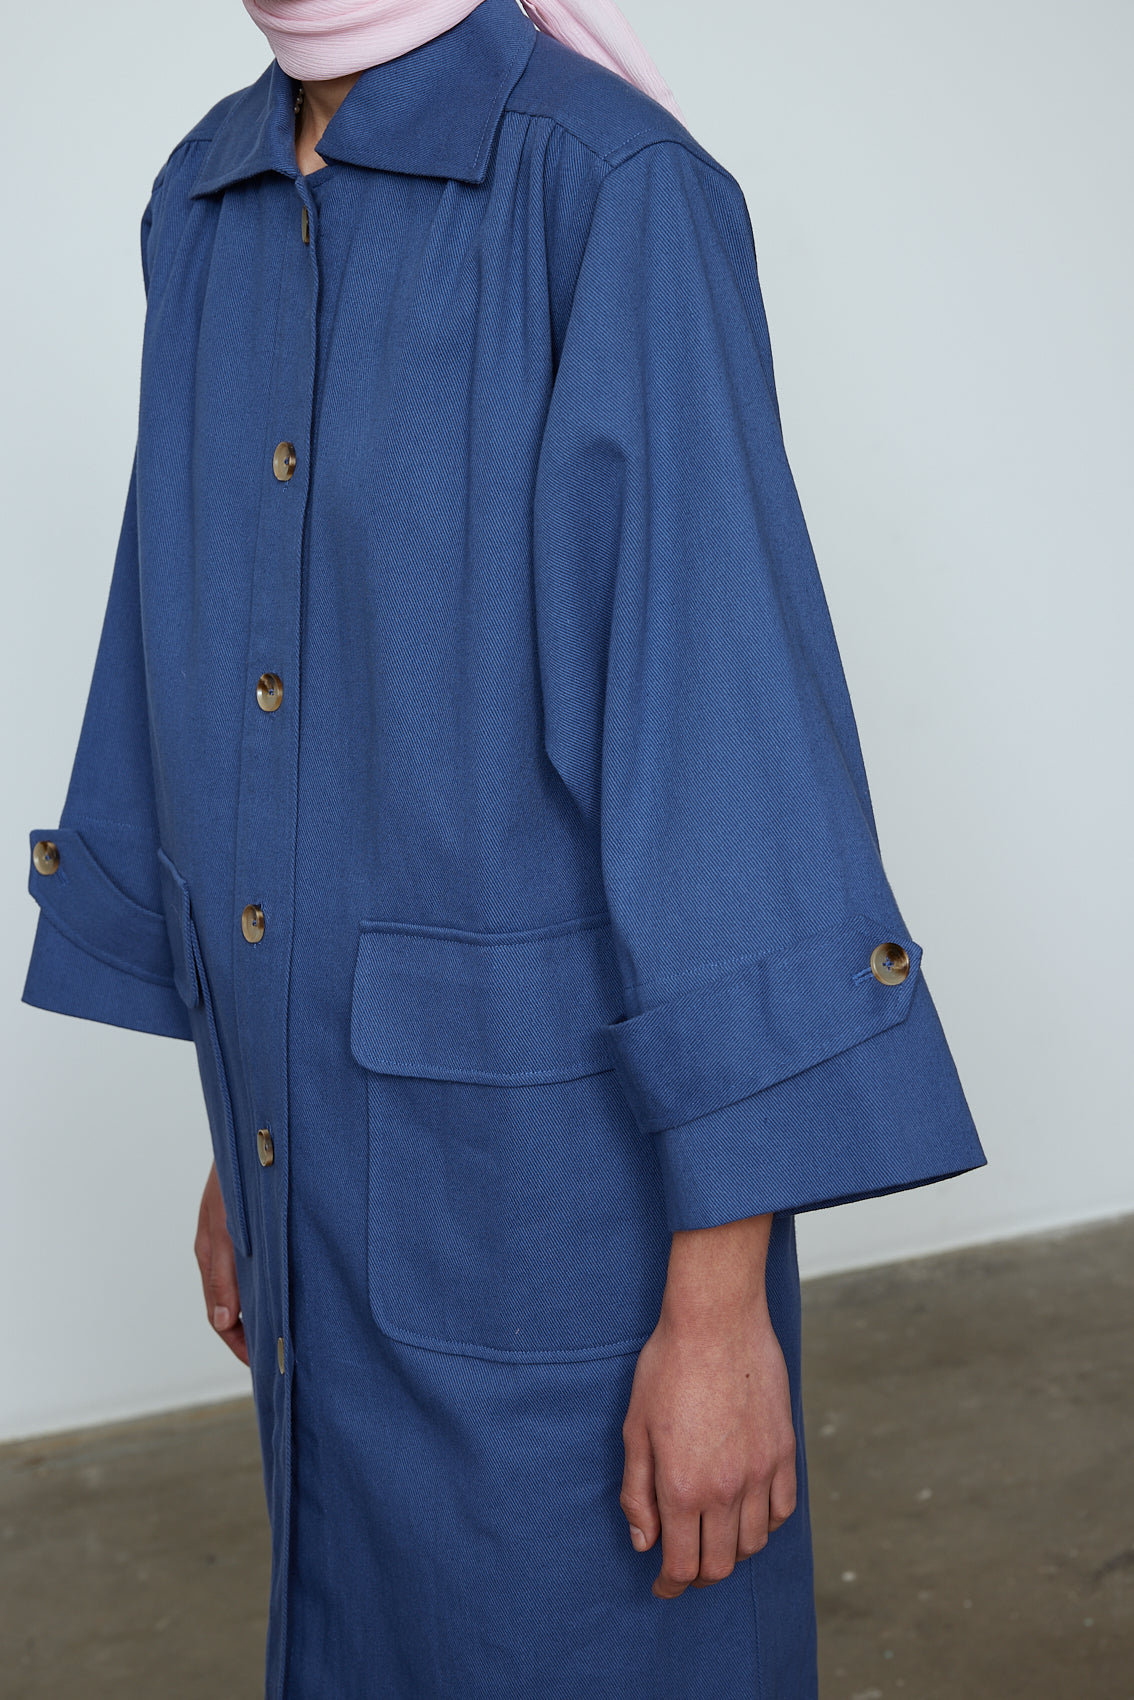 The Anna Coat in French Blue Canvas. The jacket is inspired by vintage work-wear with wide sleeves, cuffs, and button closing on the front.  Material: 100% cotton.